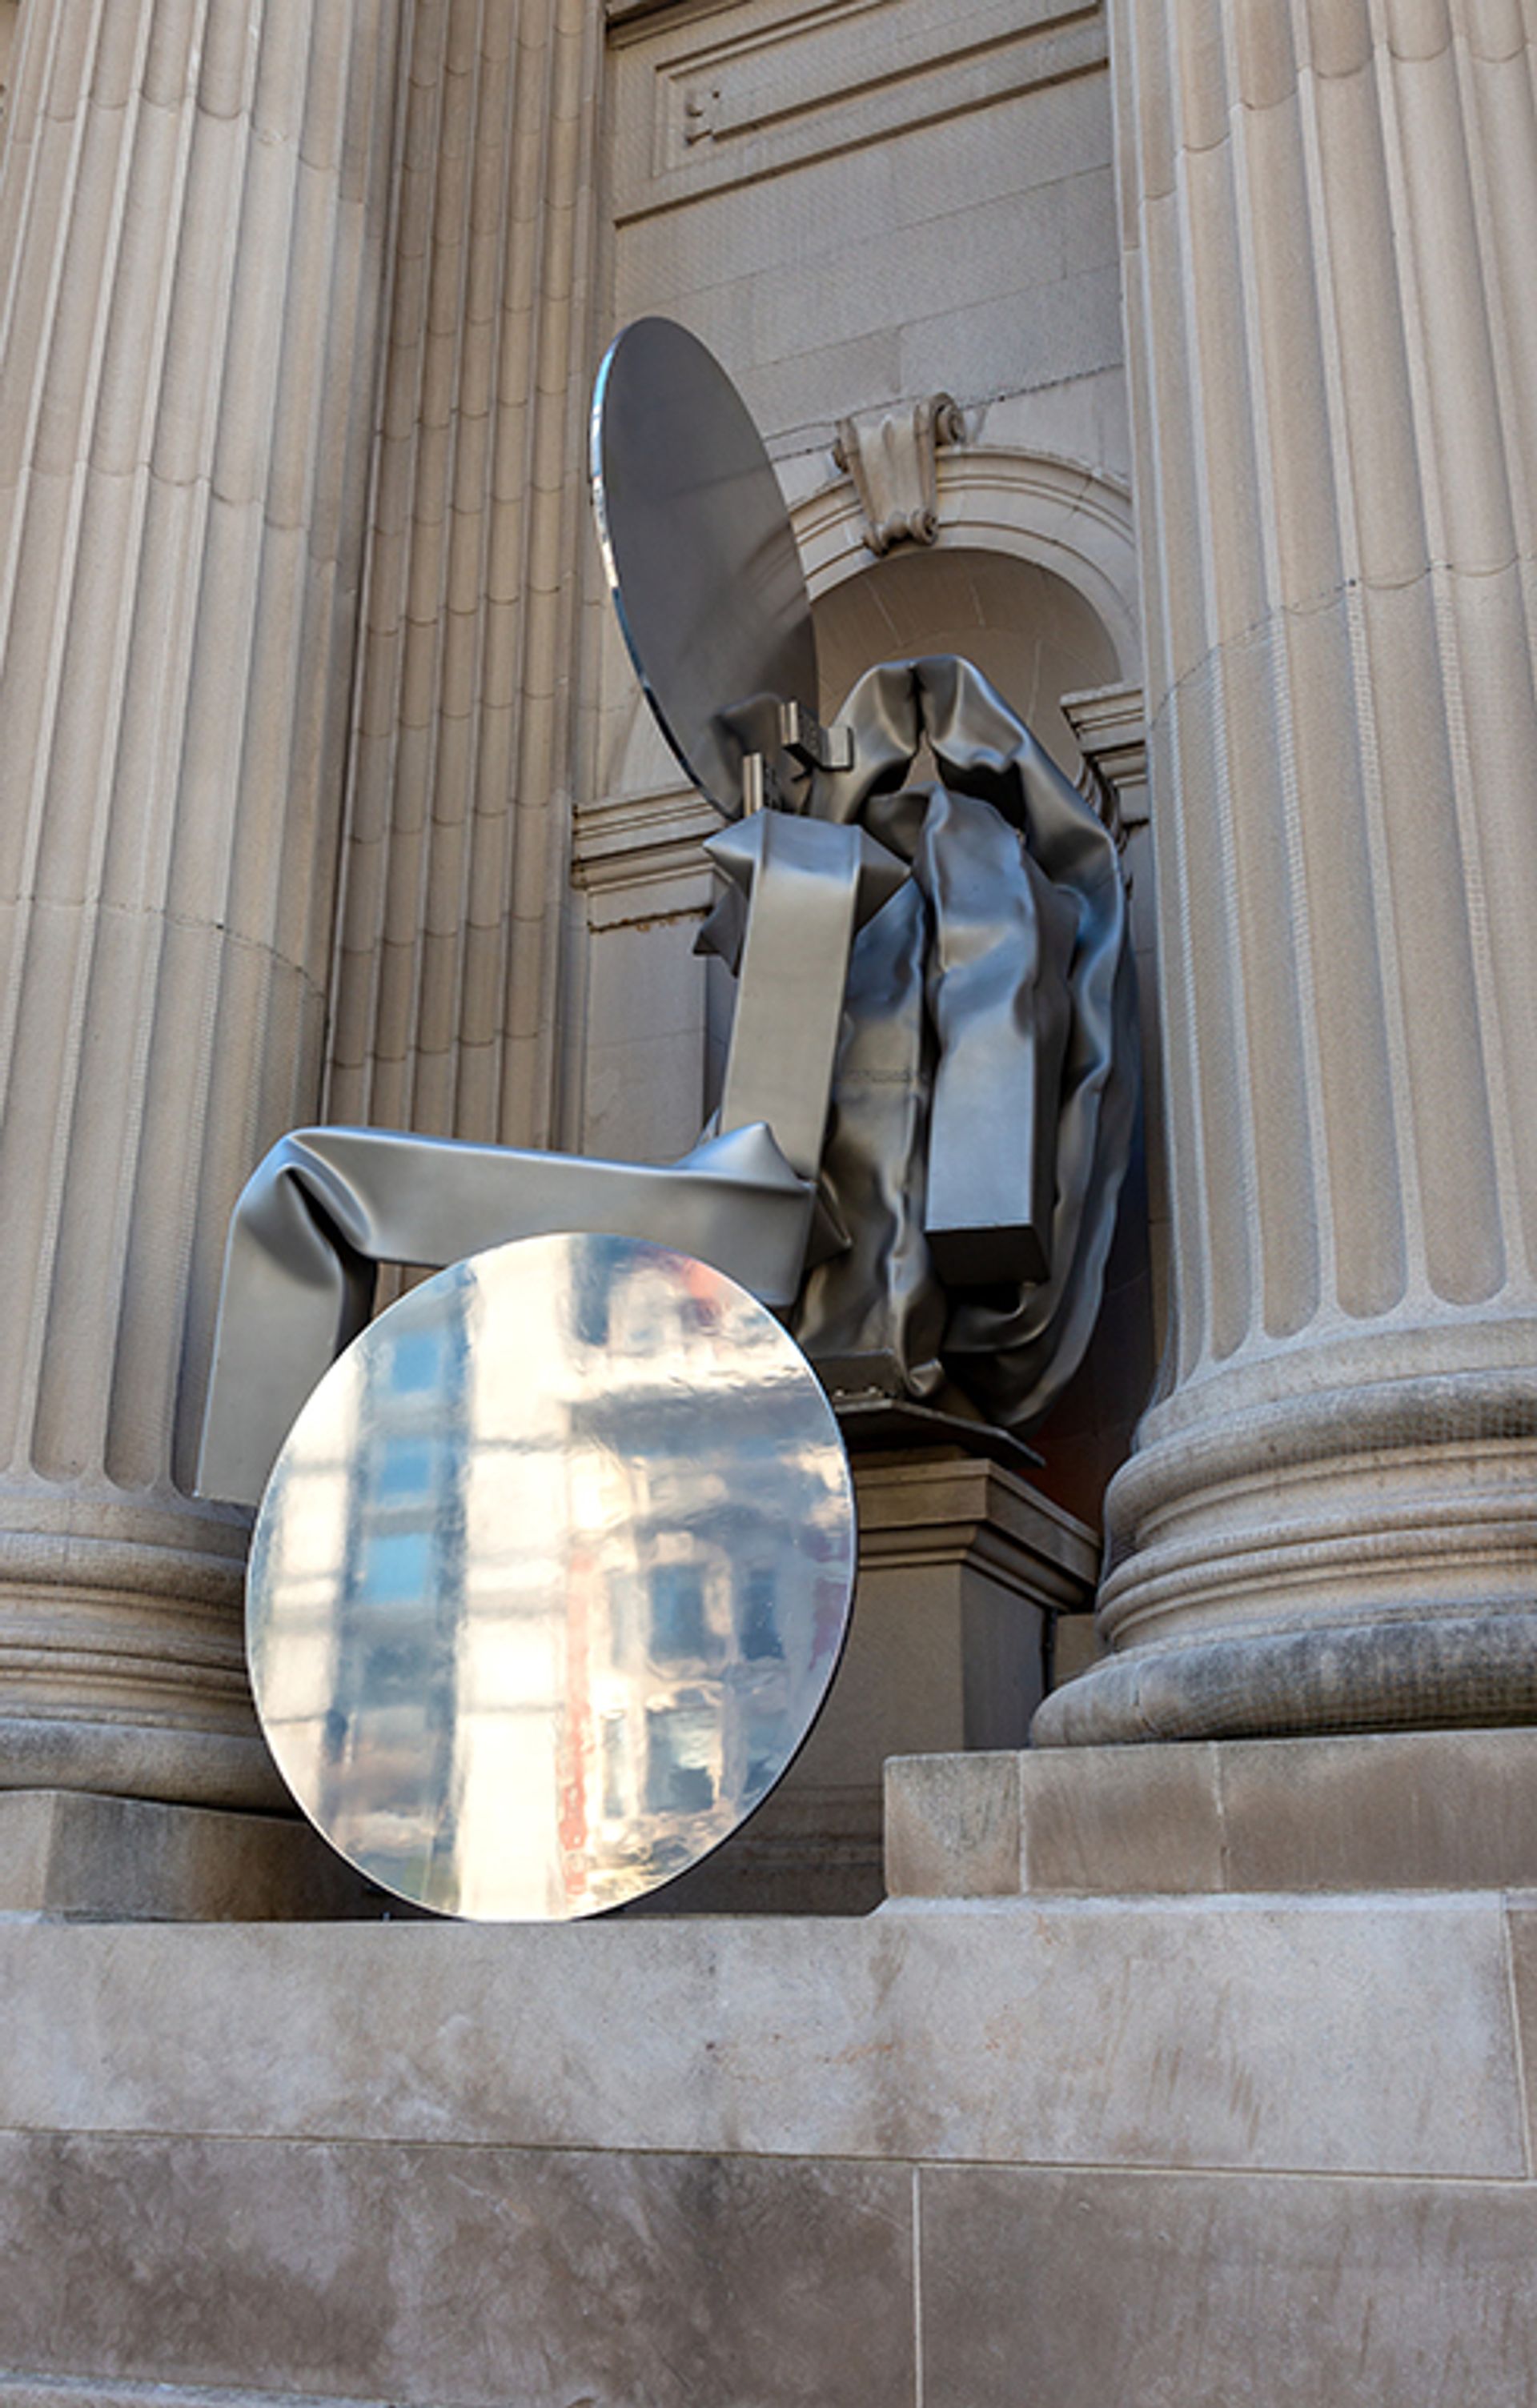 Installation detail of one of the sculptures in Carol Bove's The séances aren't helping, a commission for the niches in the Metropolitan Museum of Art's façade Courtesy of the artist and David Zwirner; the Metropolitan Museum of Art, photo by Bruce Schwarz